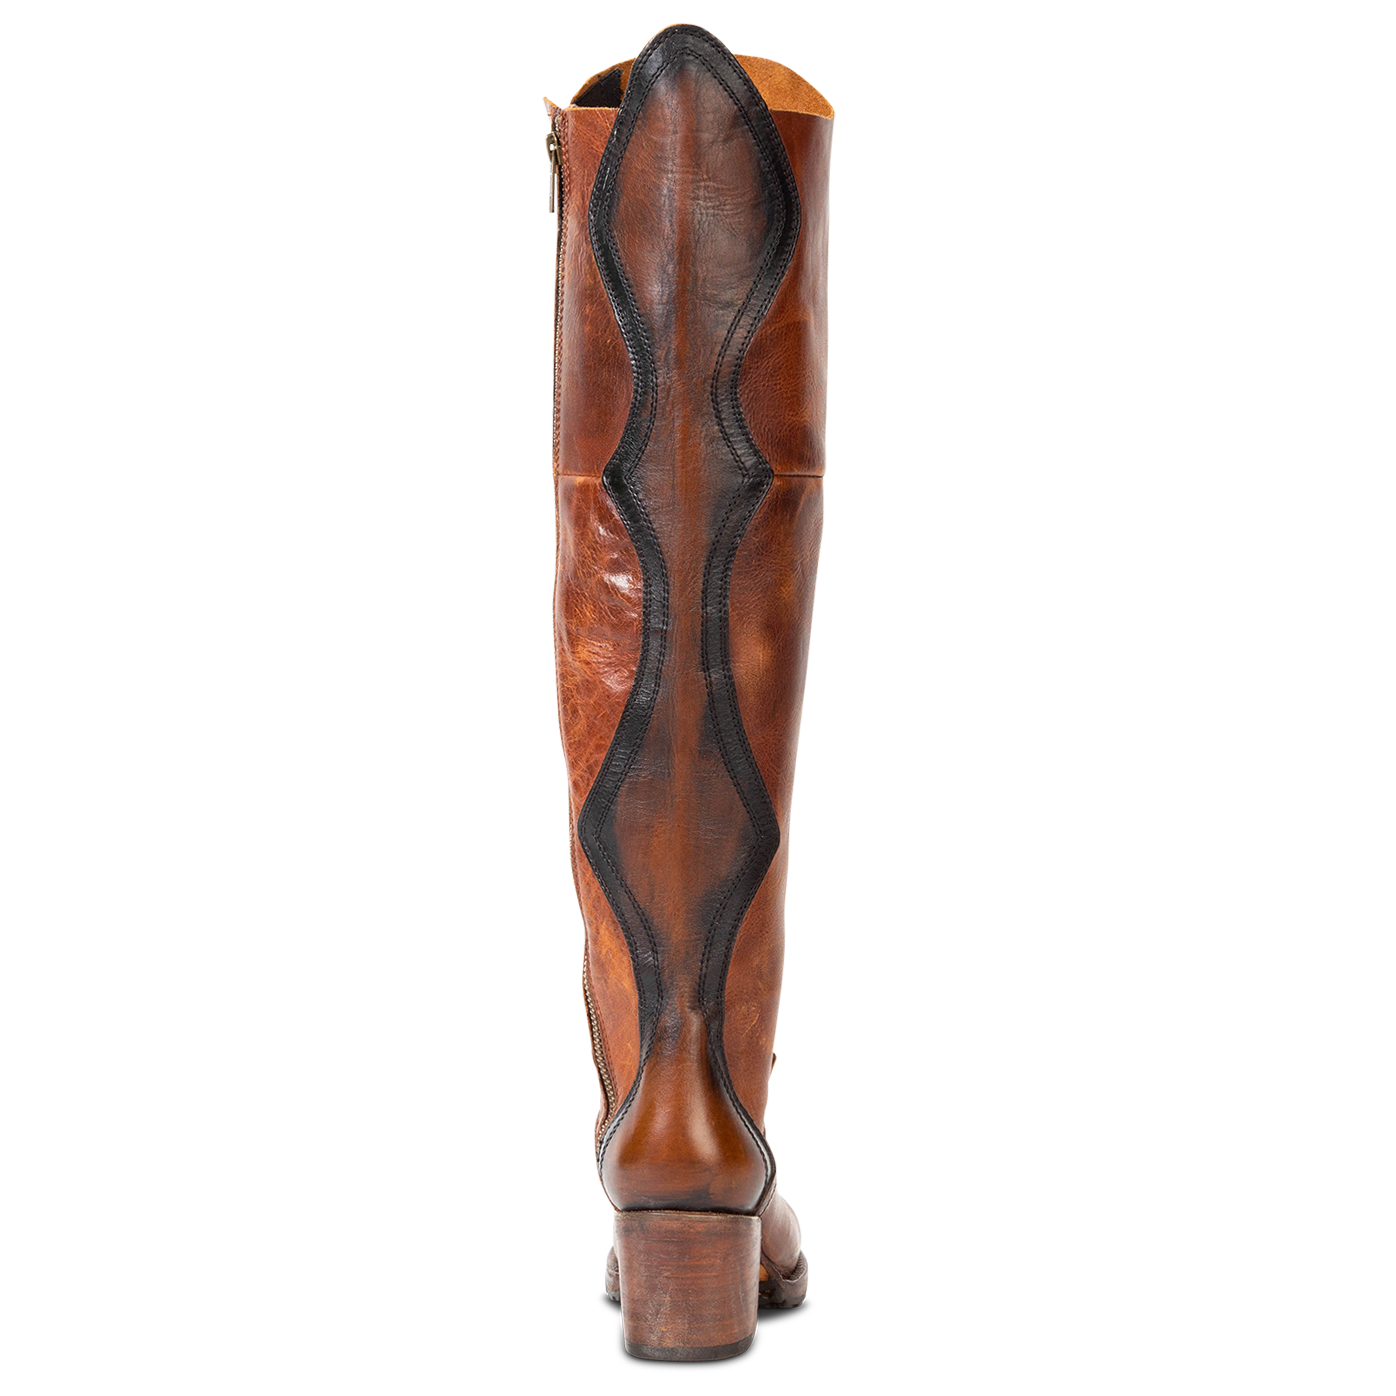 Back view showing contrasting leather panel on FREEBIRD women's Calgary cognac tall leather boot